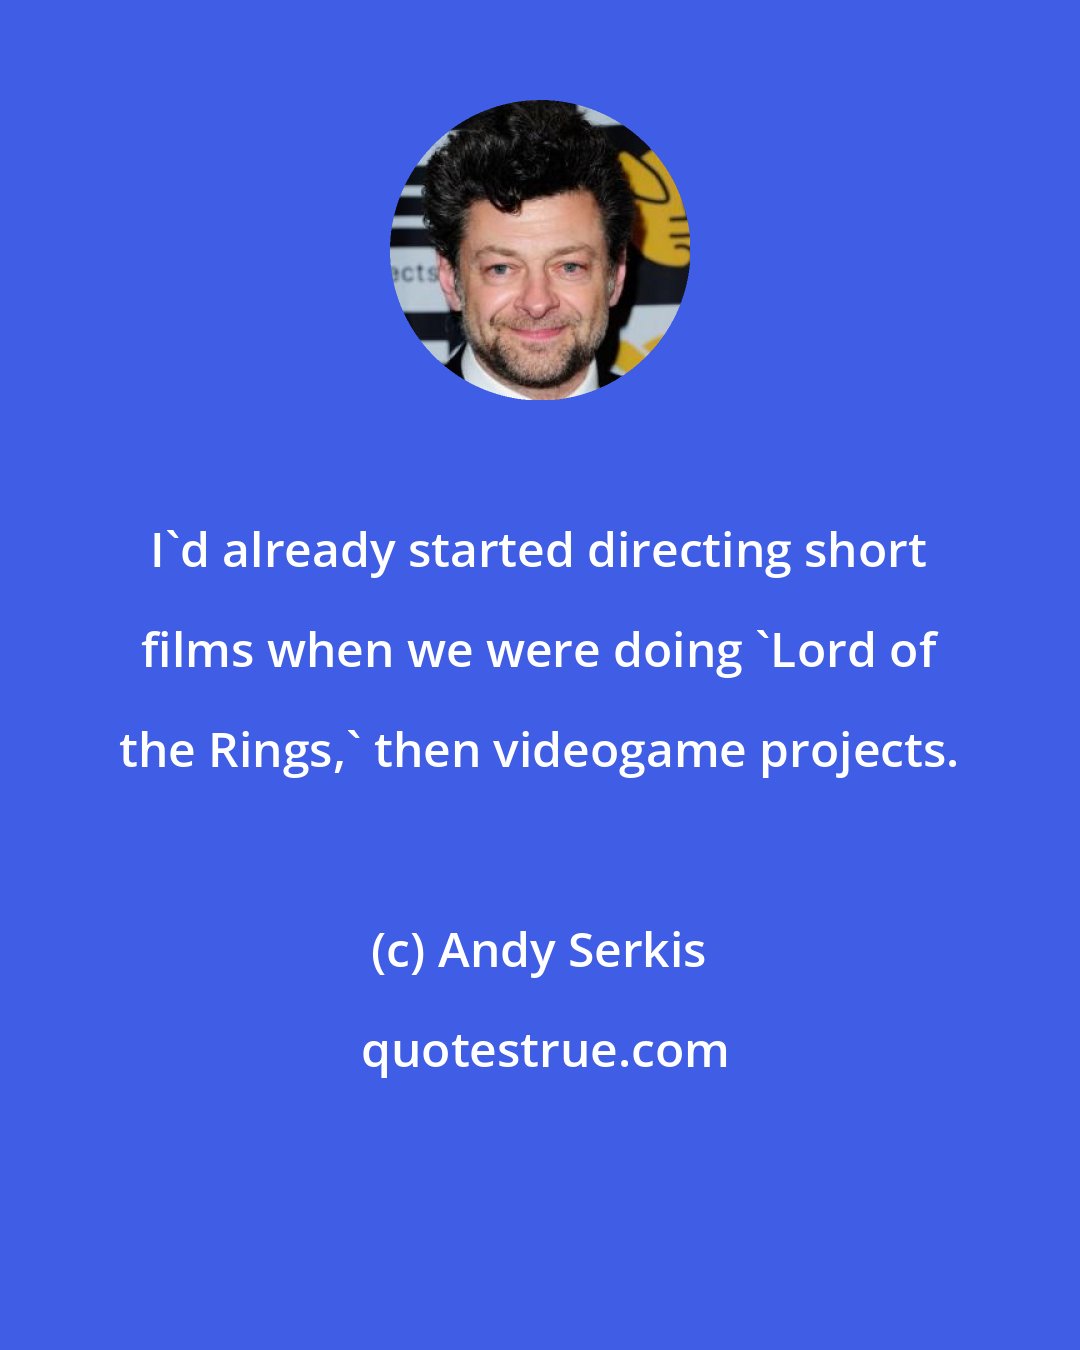 Andy Serkis: I'd already started directing short films when we were doing 'Lord of the Rings,' then videogame projects.